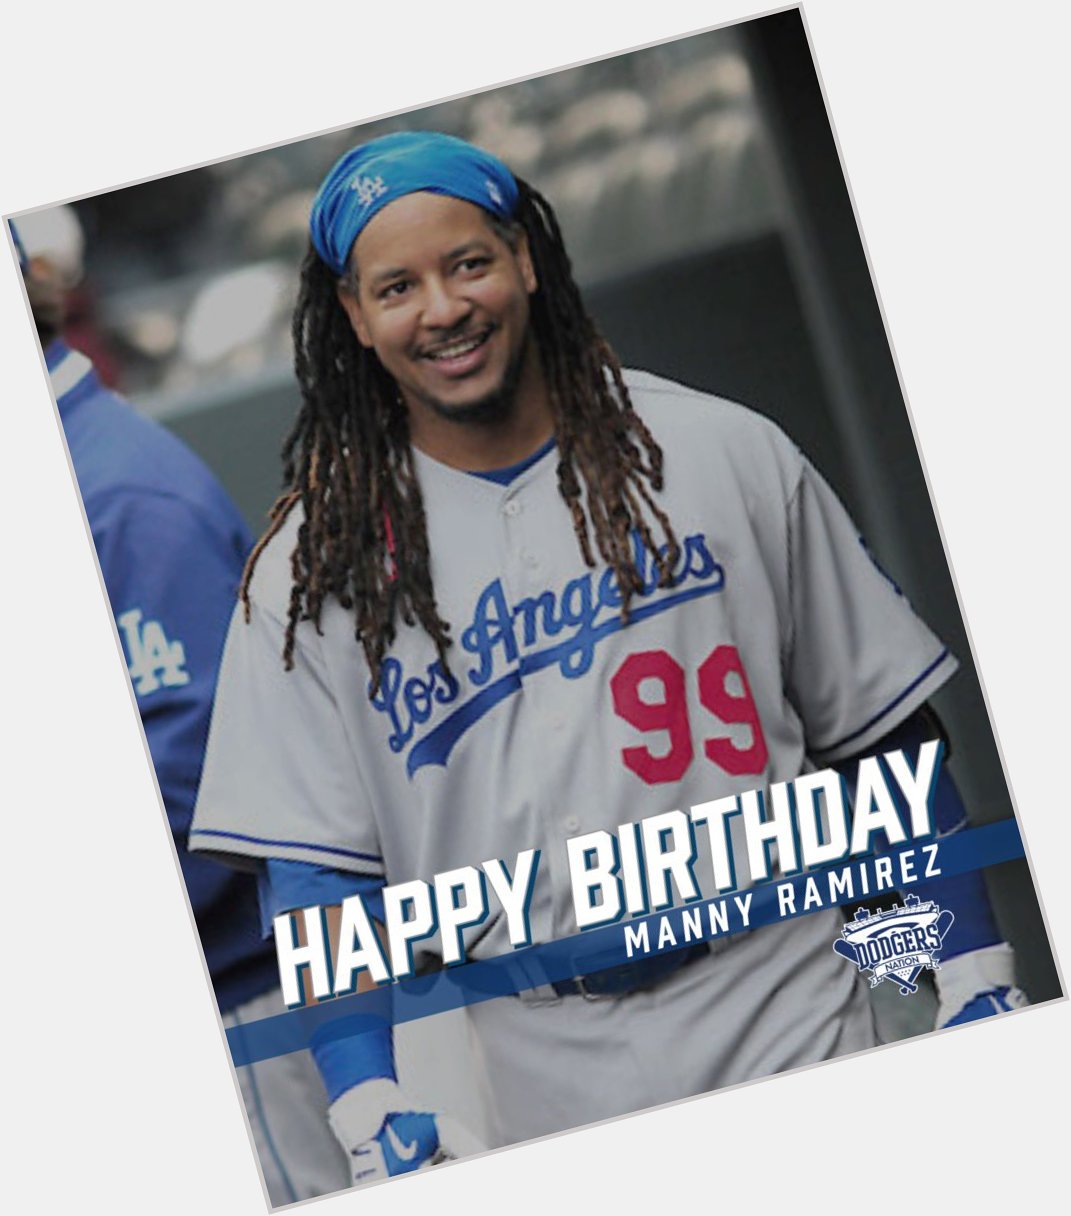 Happy Birthday to the one and only Manny Ramirez! 